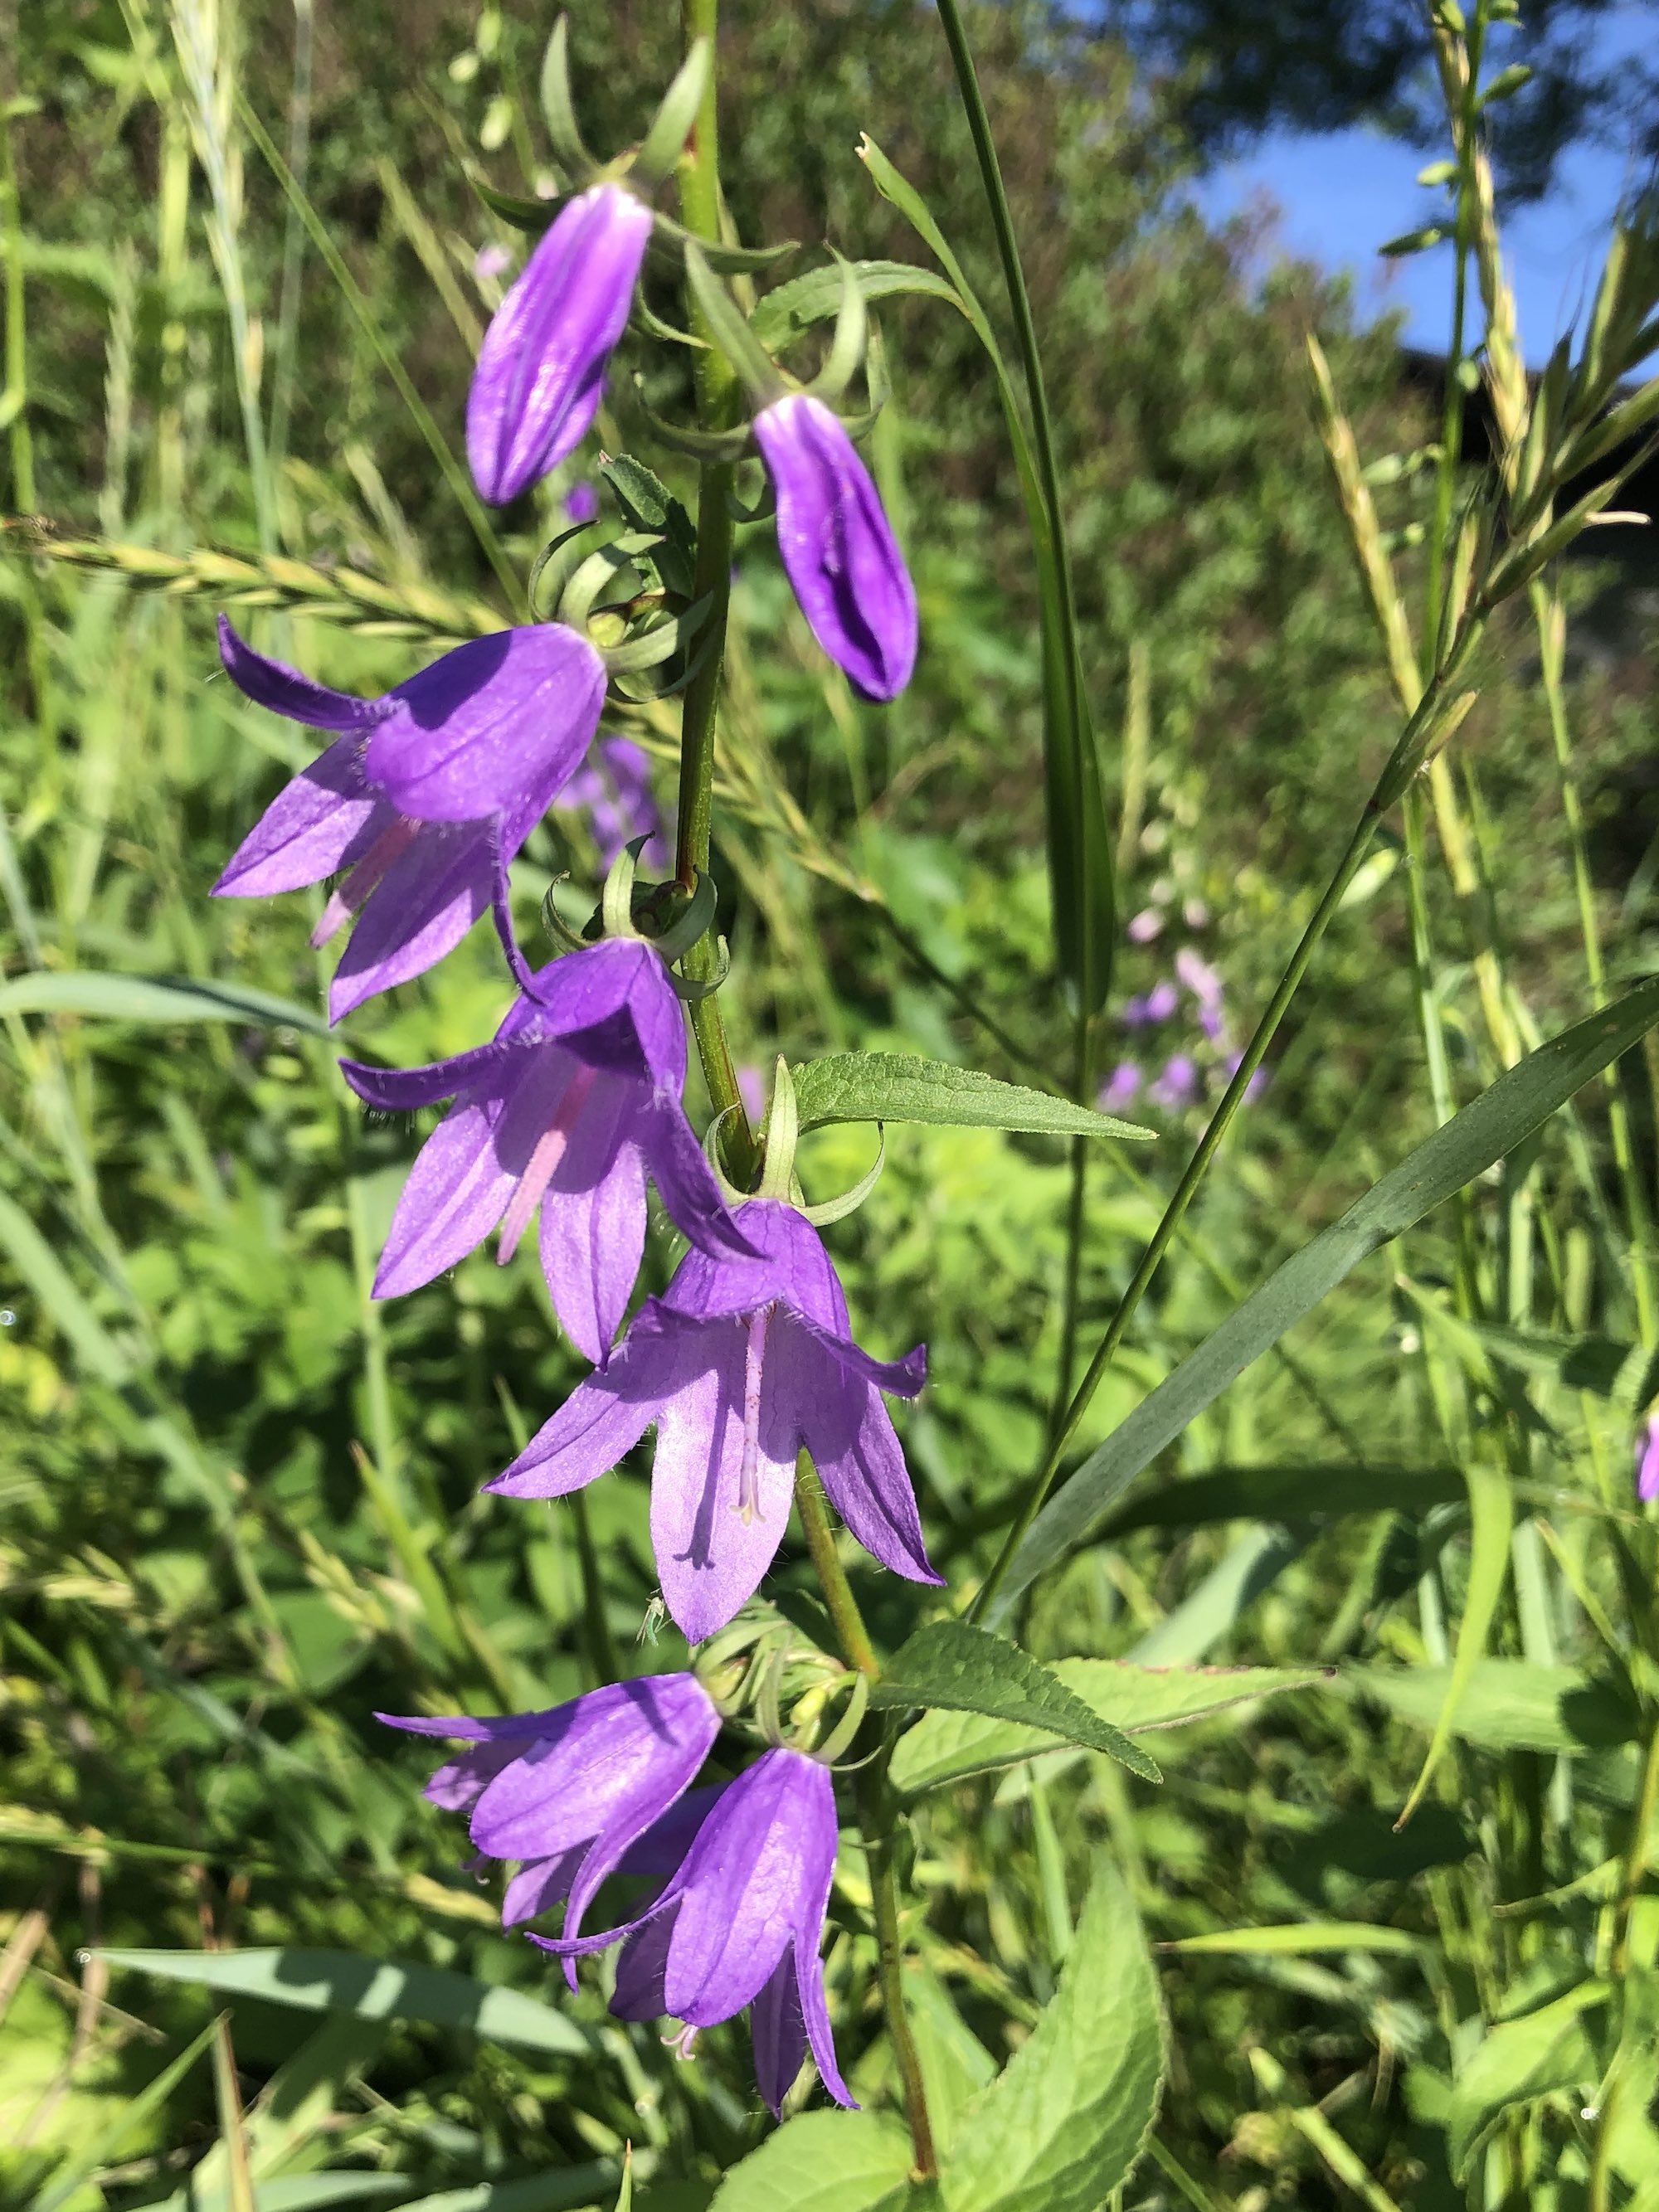 Creeping Bellflower on Manitou Way in Madison, Wisconsin on June 30, 2020.